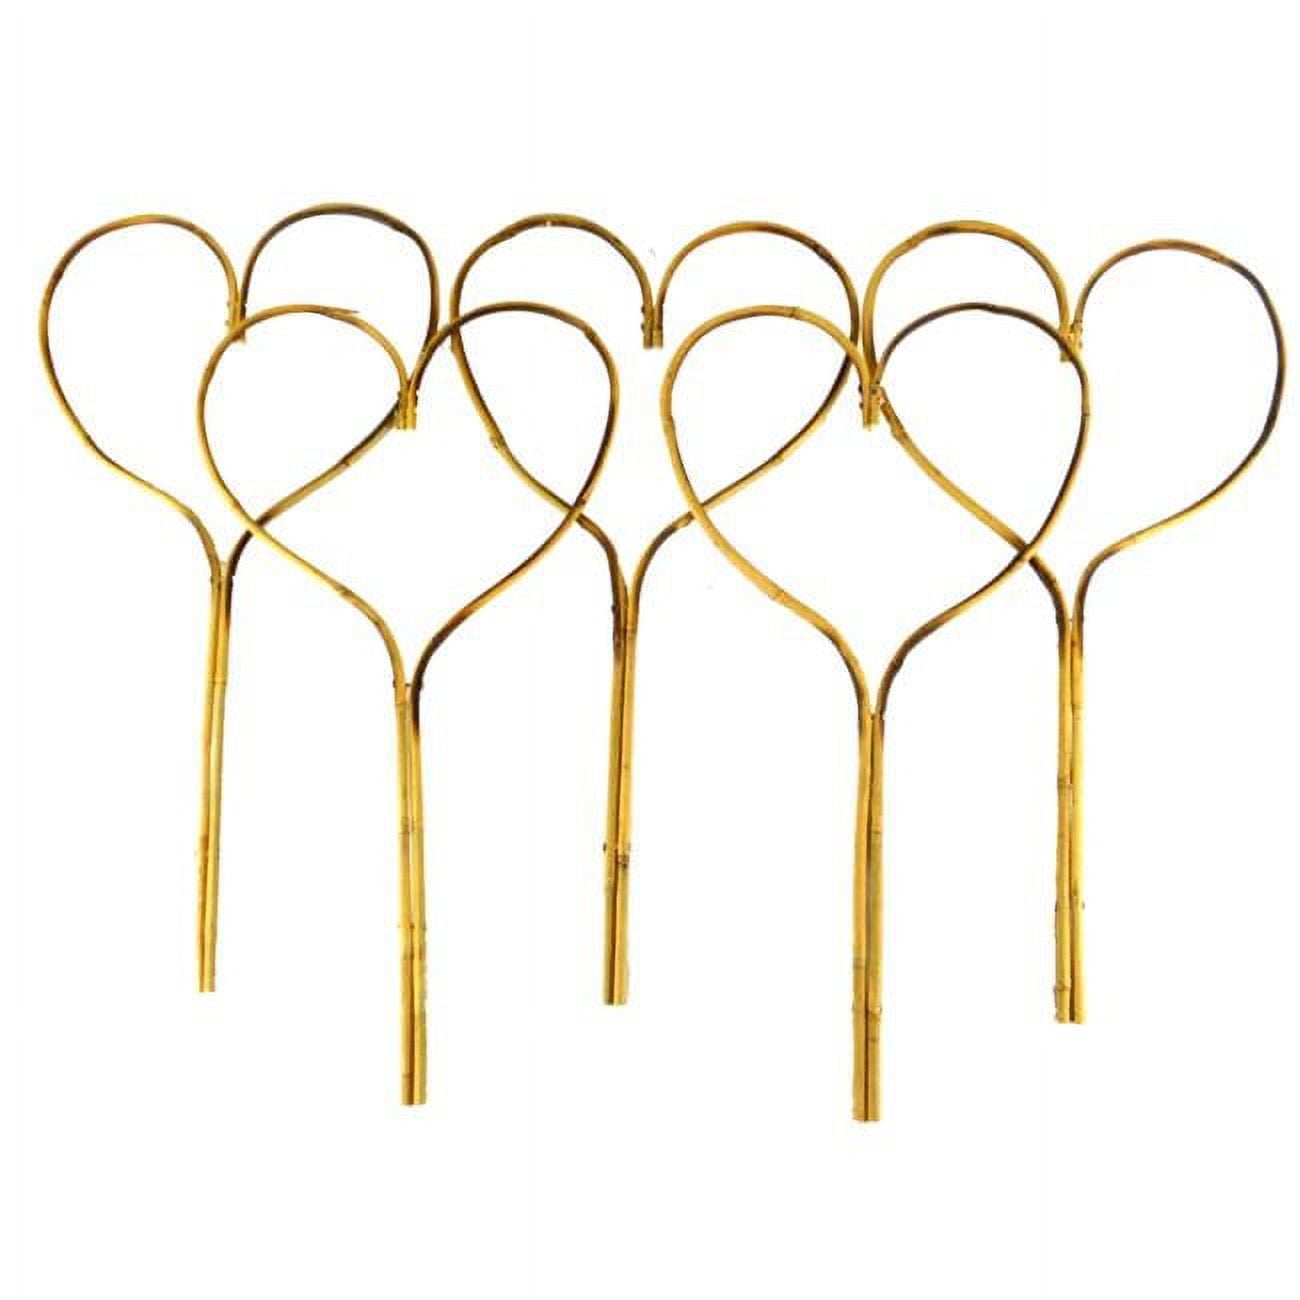 Bh117es5 24 In. Bamboo Heart Stake - Pack Of 5